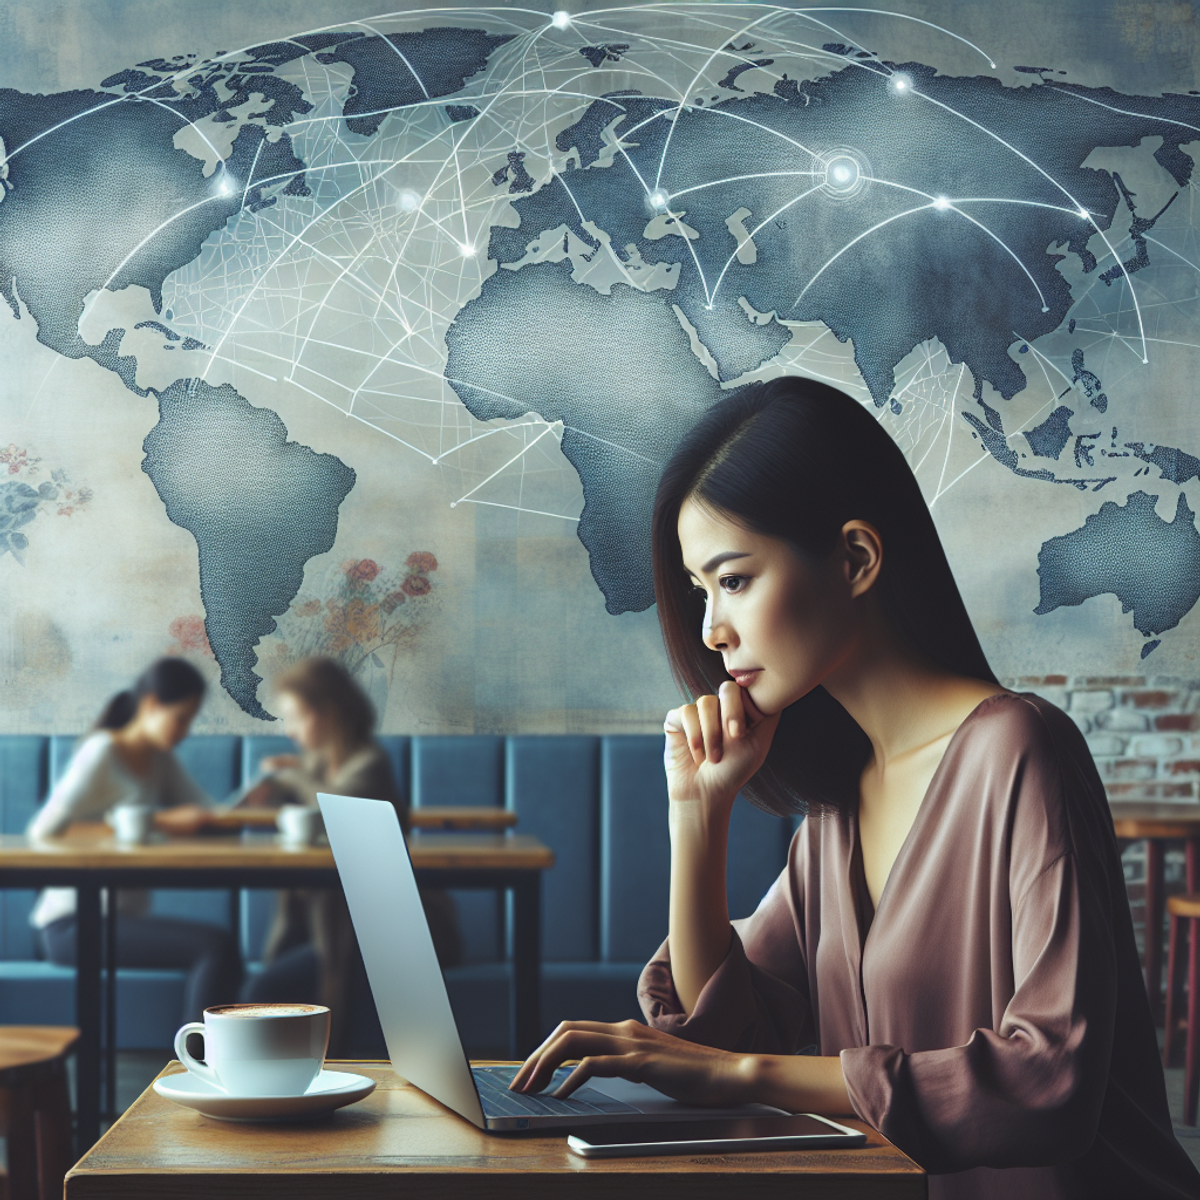 An East Asian woman sitting in a coffee shop, working on a silver laptop with a globe mural in the background, symbolizing global connectivity and remote work.